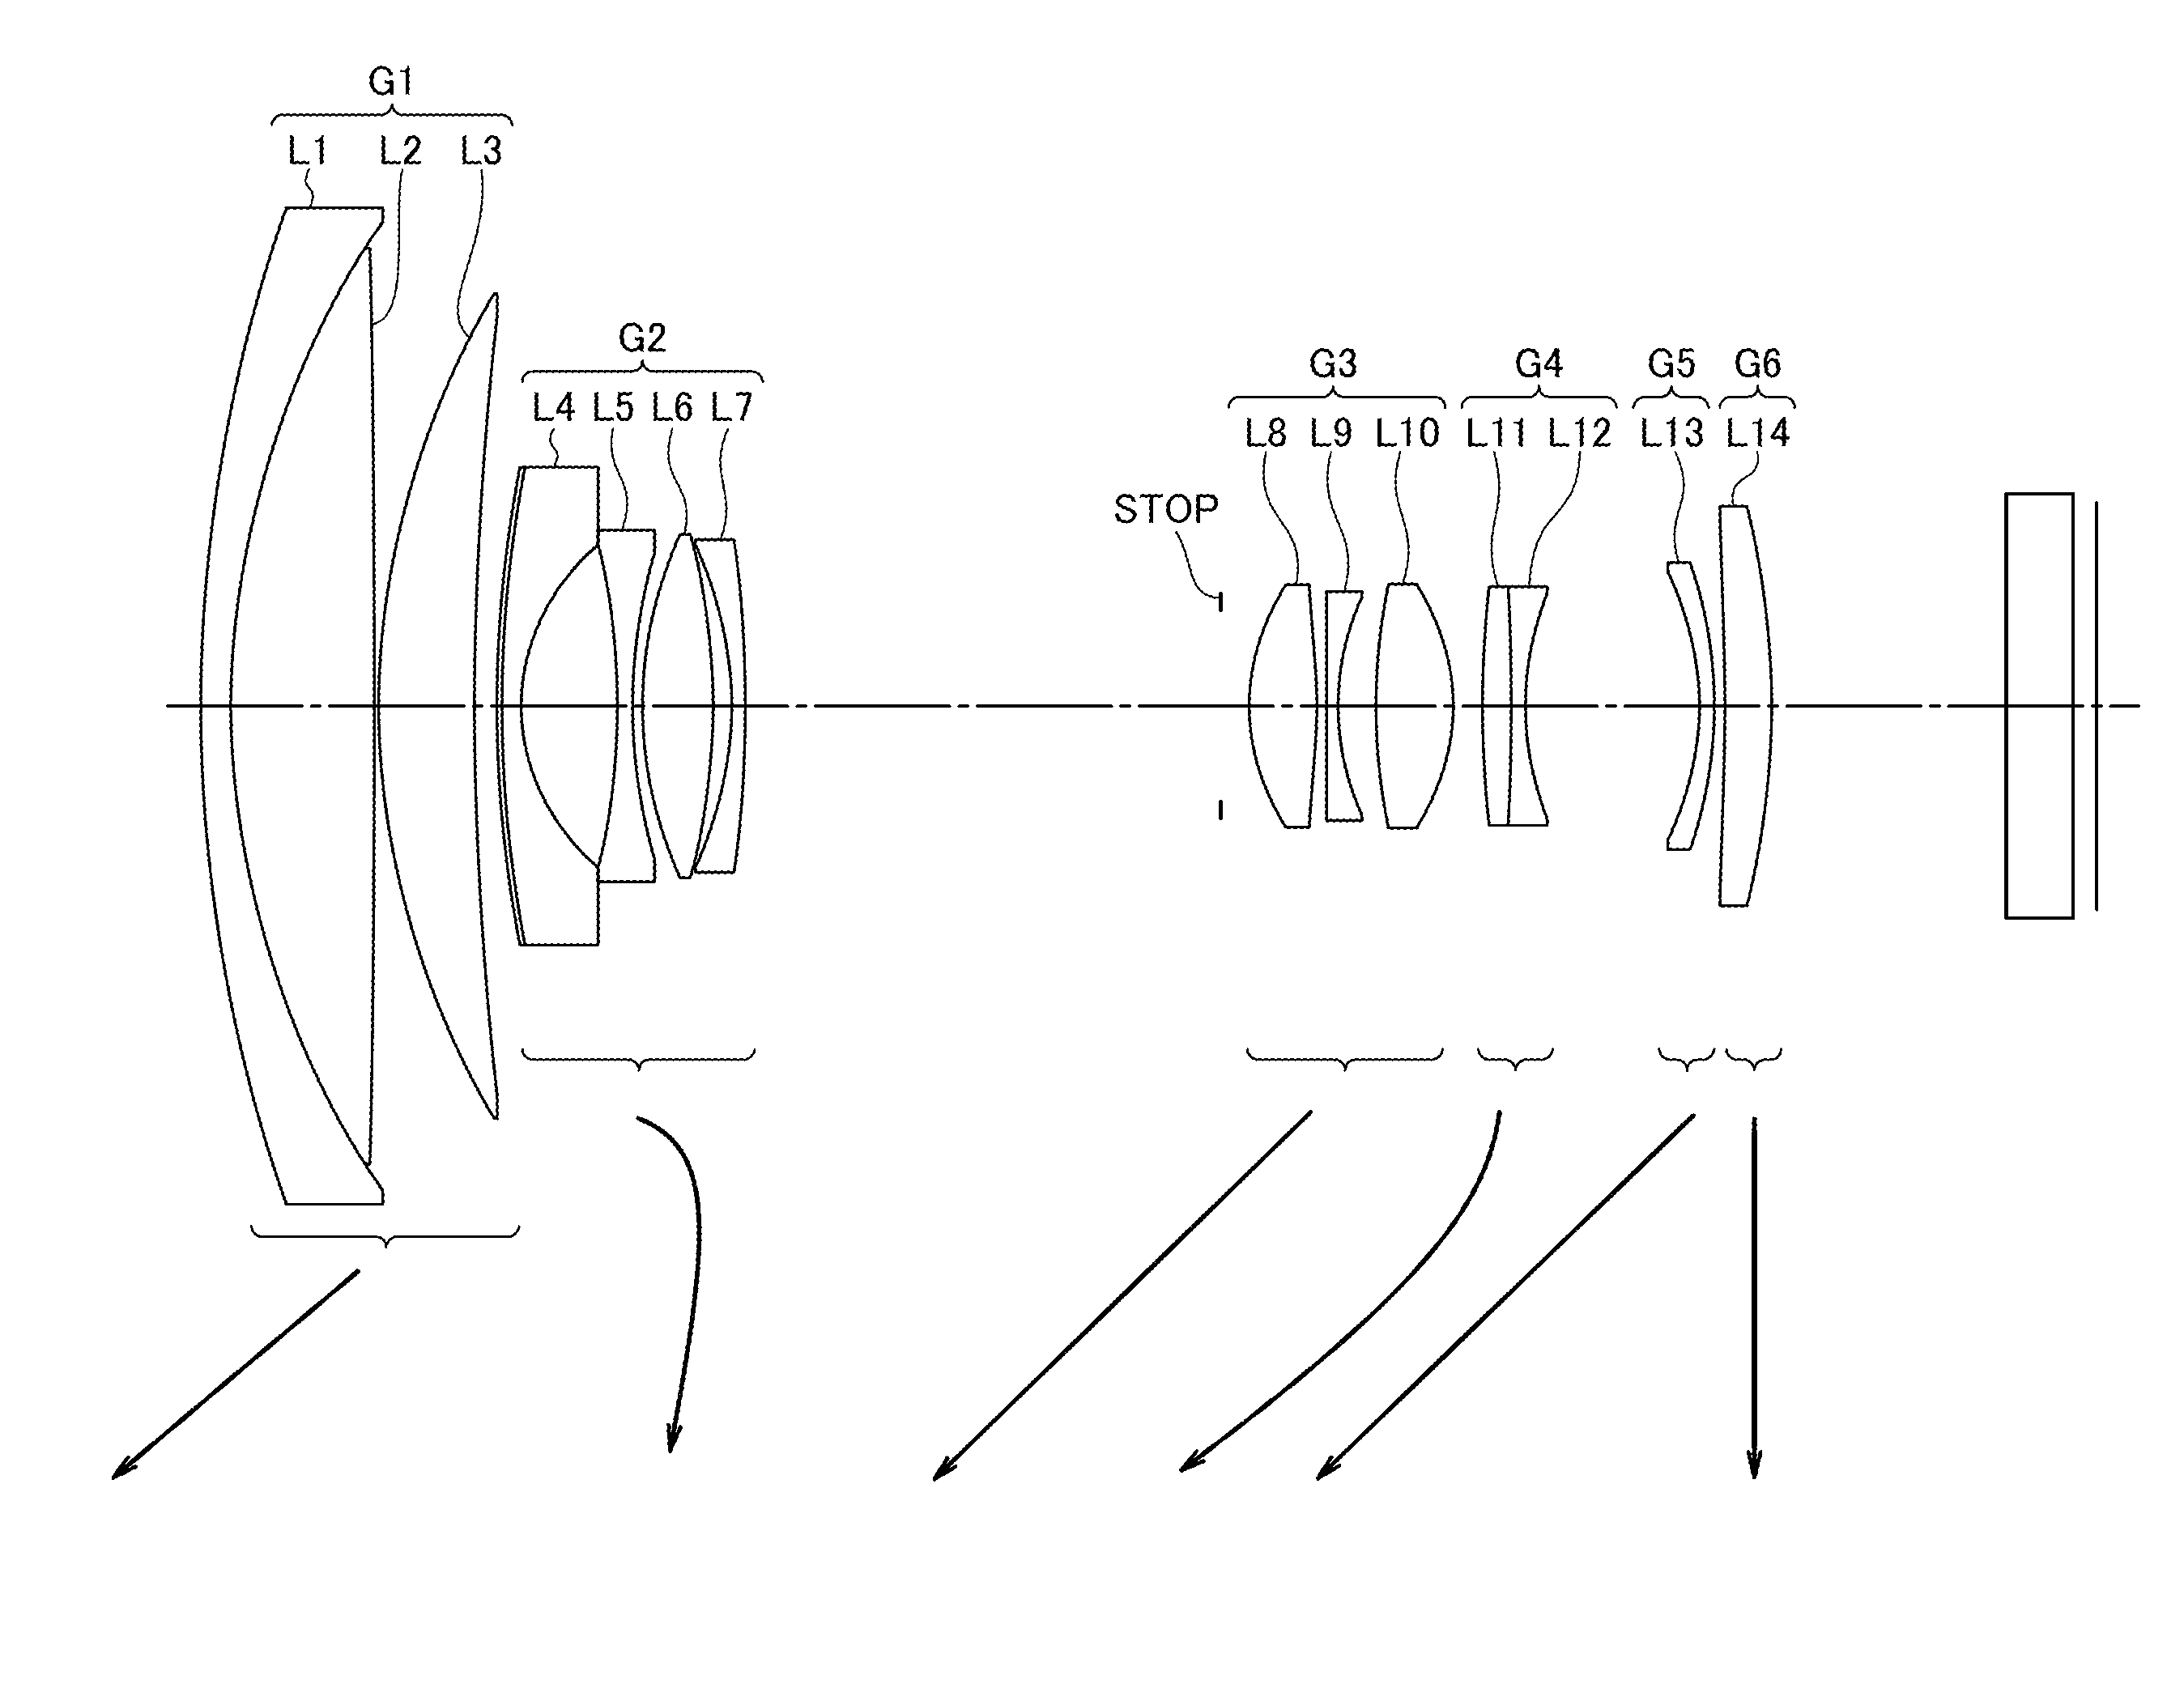 Zoom lens, and imaging apparatus equipped with same